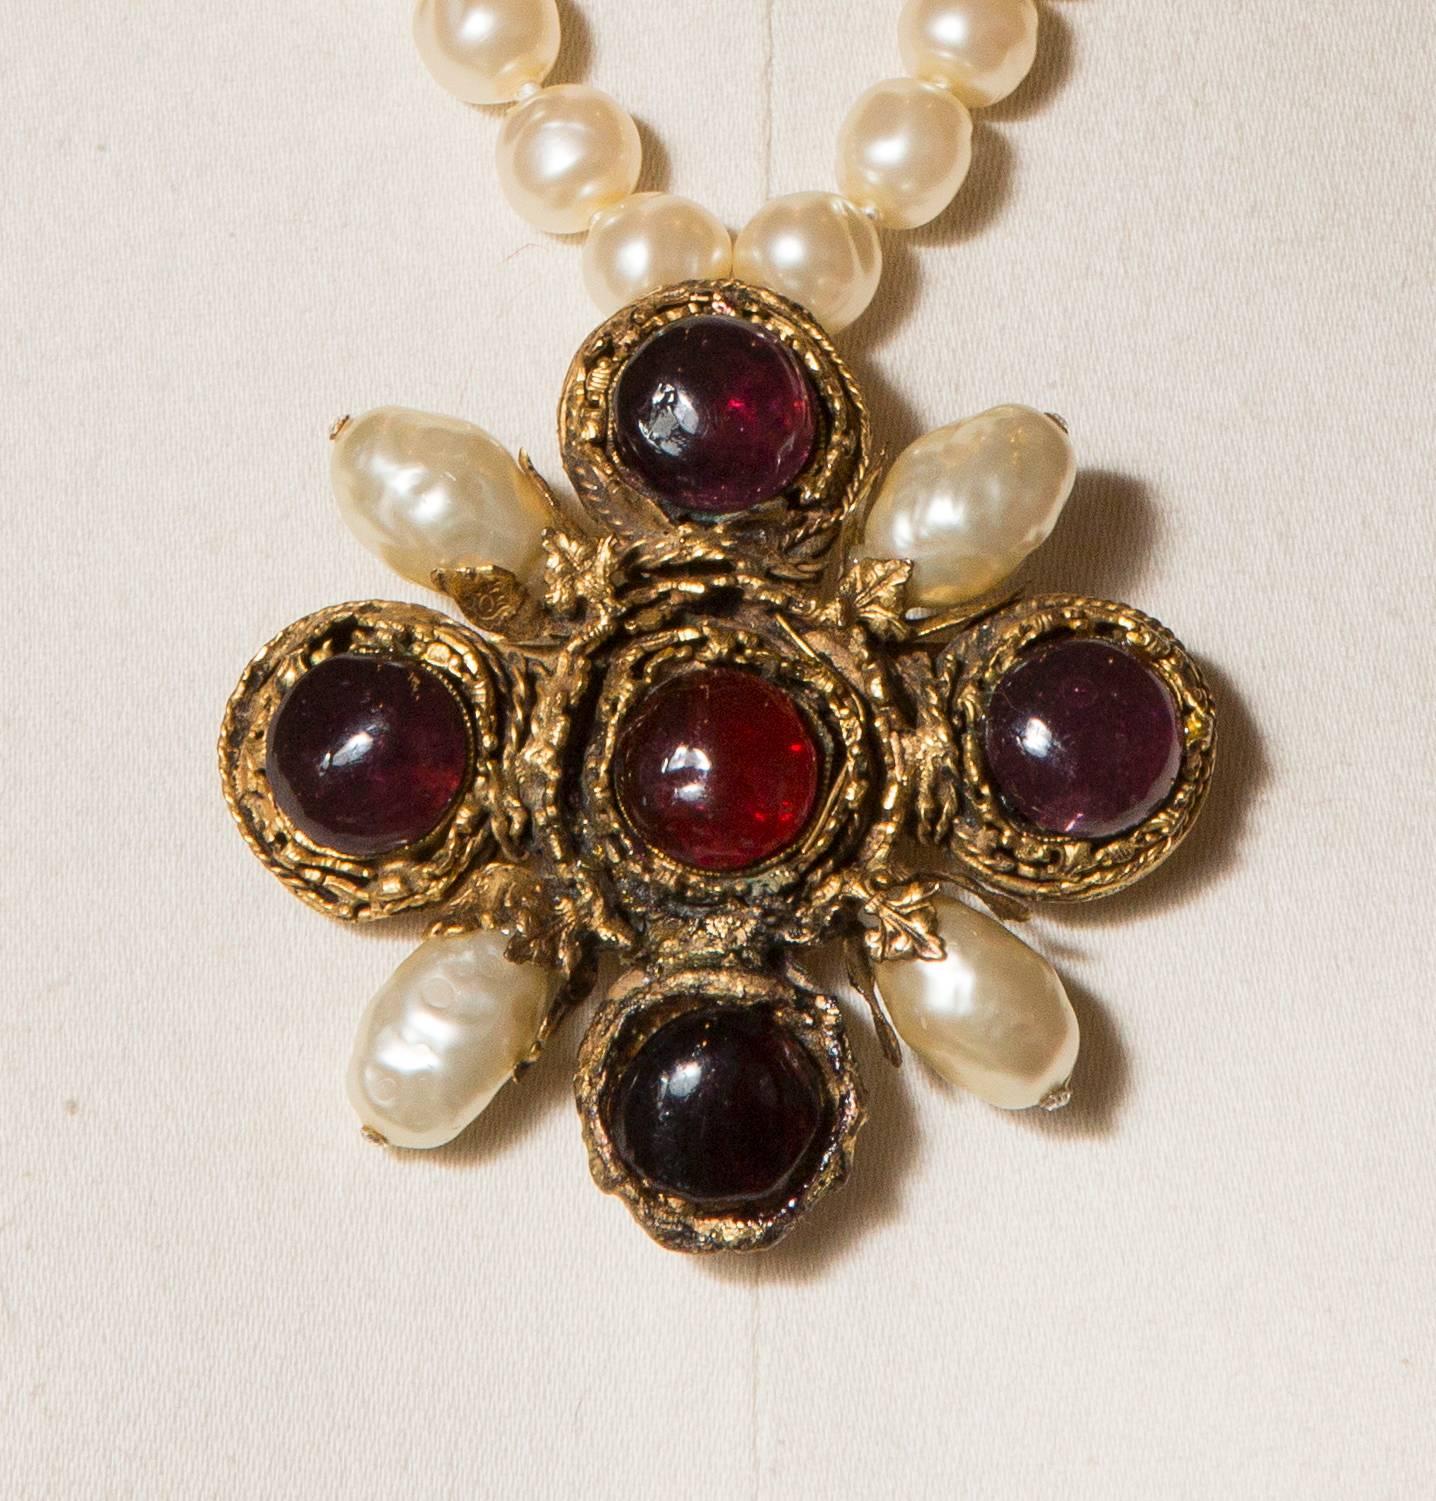 1984 Chanel by Gripoix Rare Necklace Fake Pearls and Cross Pendant .
Fabulous and rare necklace barocco faux  38 pearls with a cross pendant with 4 oval fake pearls and 5 glass cabochons one red ruby and four like amethyst
The pendant is signed and